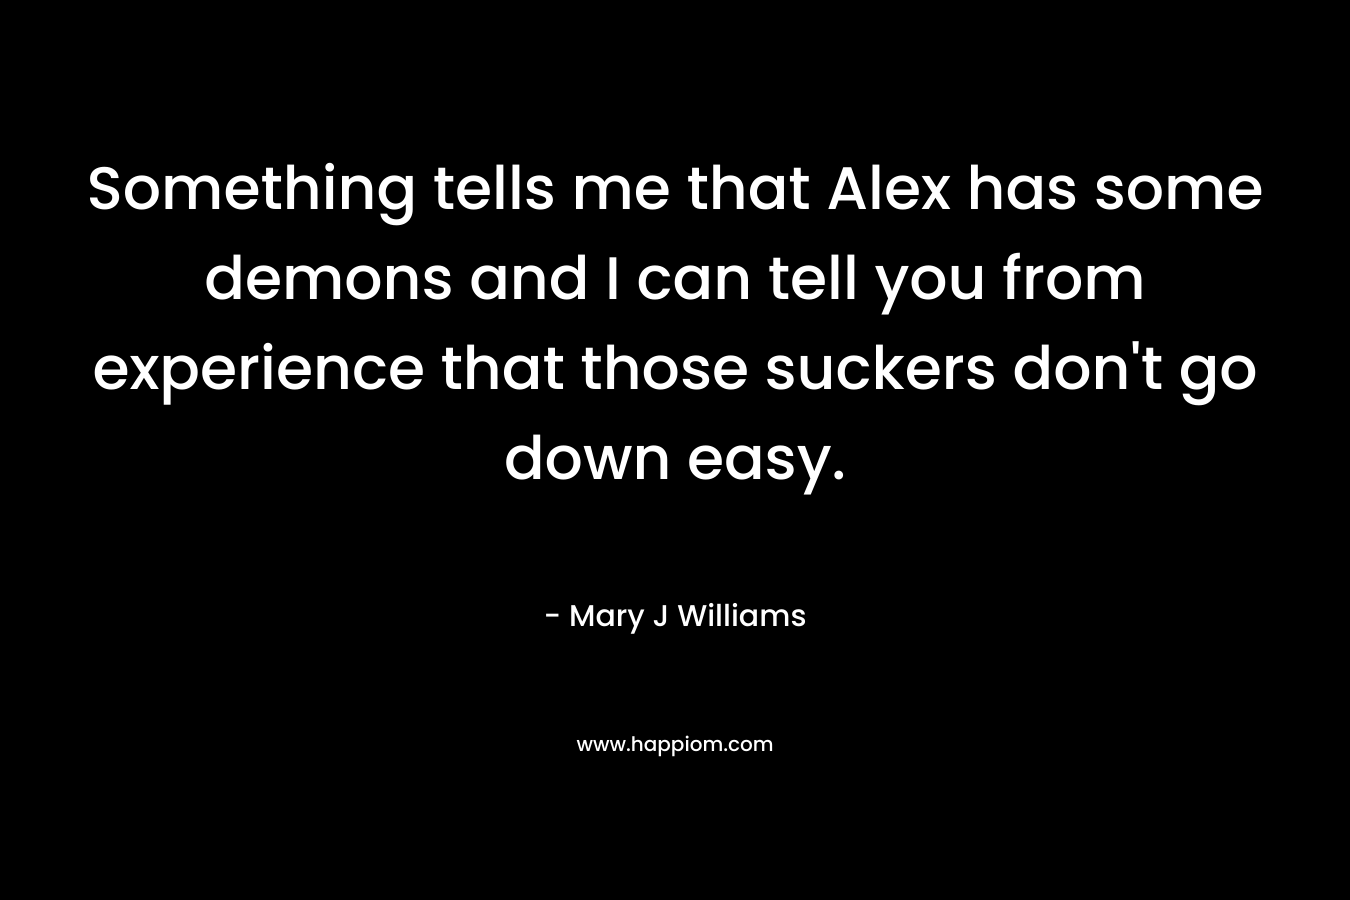 Something tells me that Alex has some demons and I can tell you from experience that those suckers don’t go down easy. – Mary J Williams